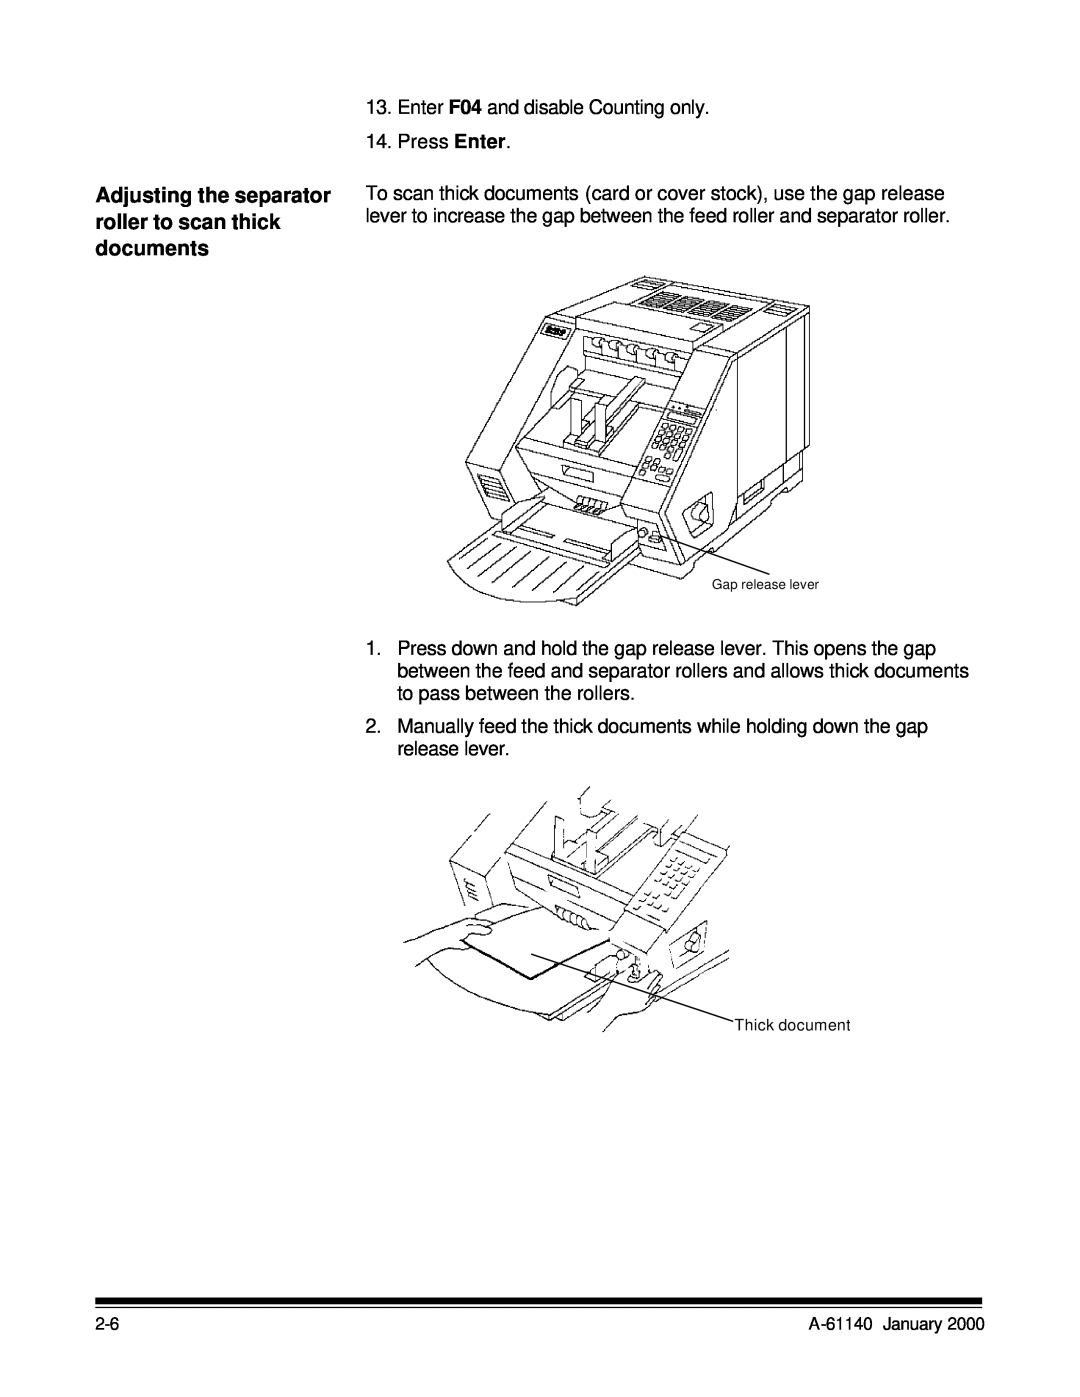 Kodak 7520 manual Adjusting the separator roller to scan thick documents 